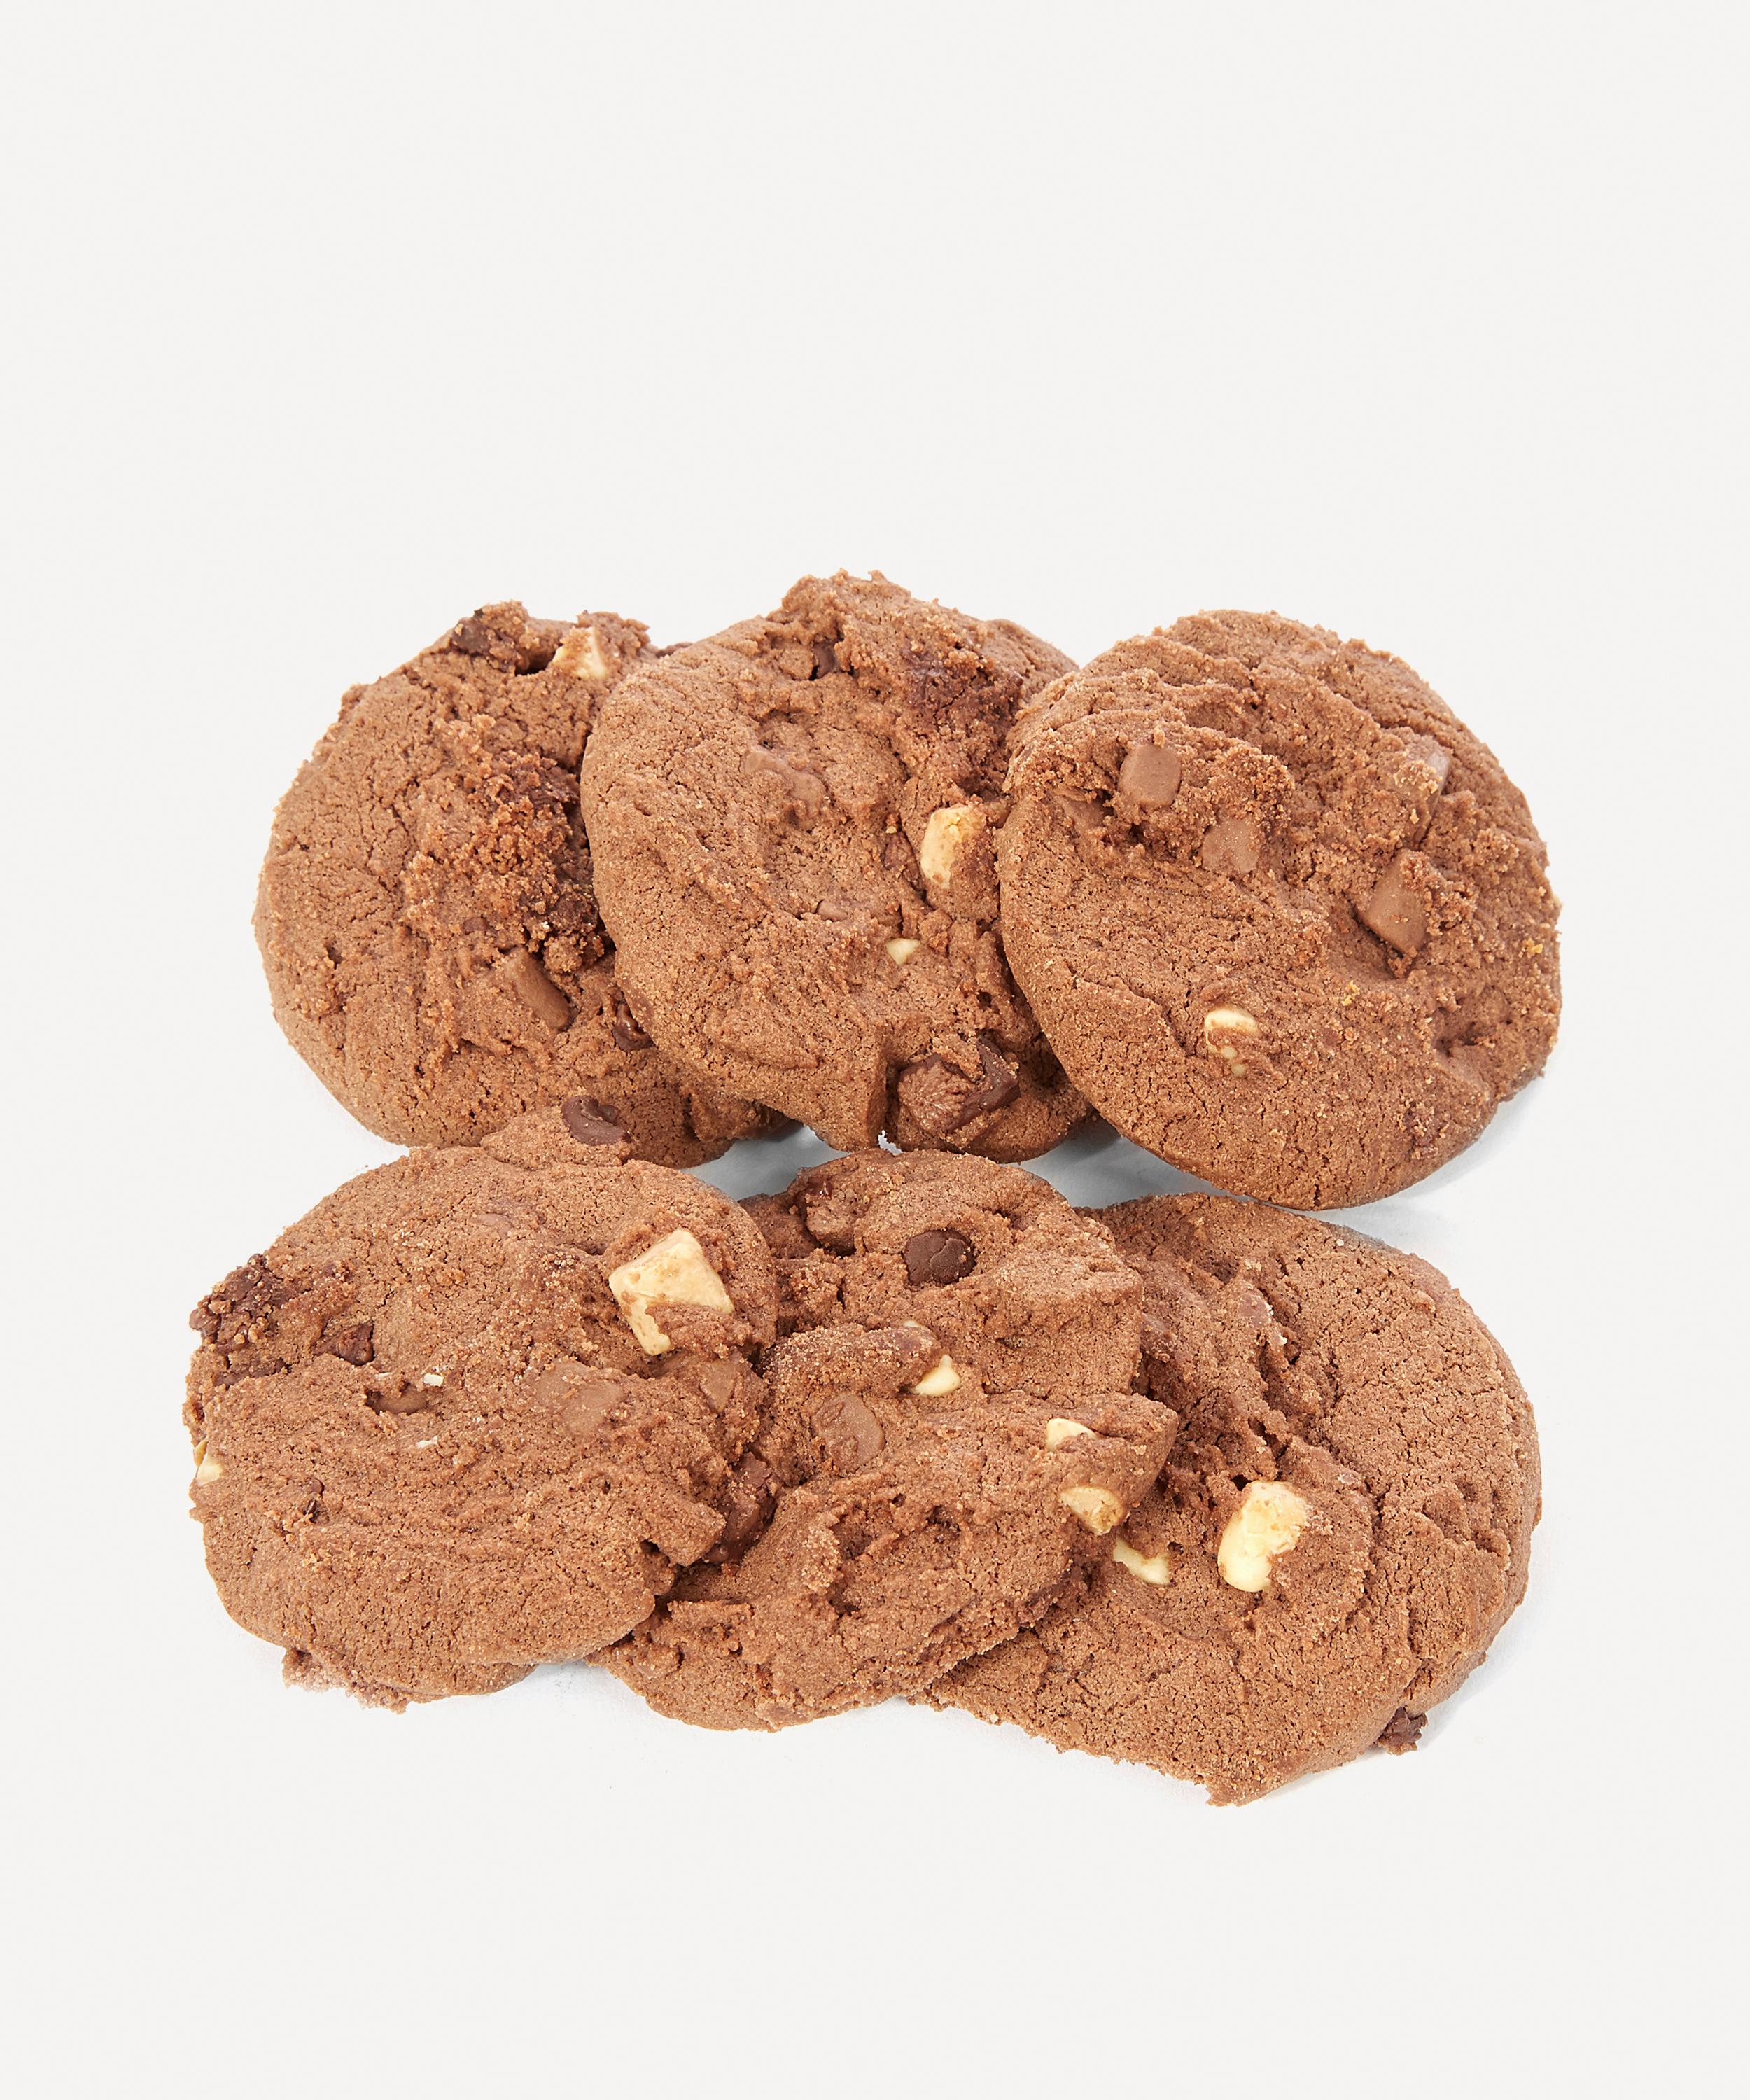 Exquisite Triple Chocolate Chunk Biscuits 0g Liberty